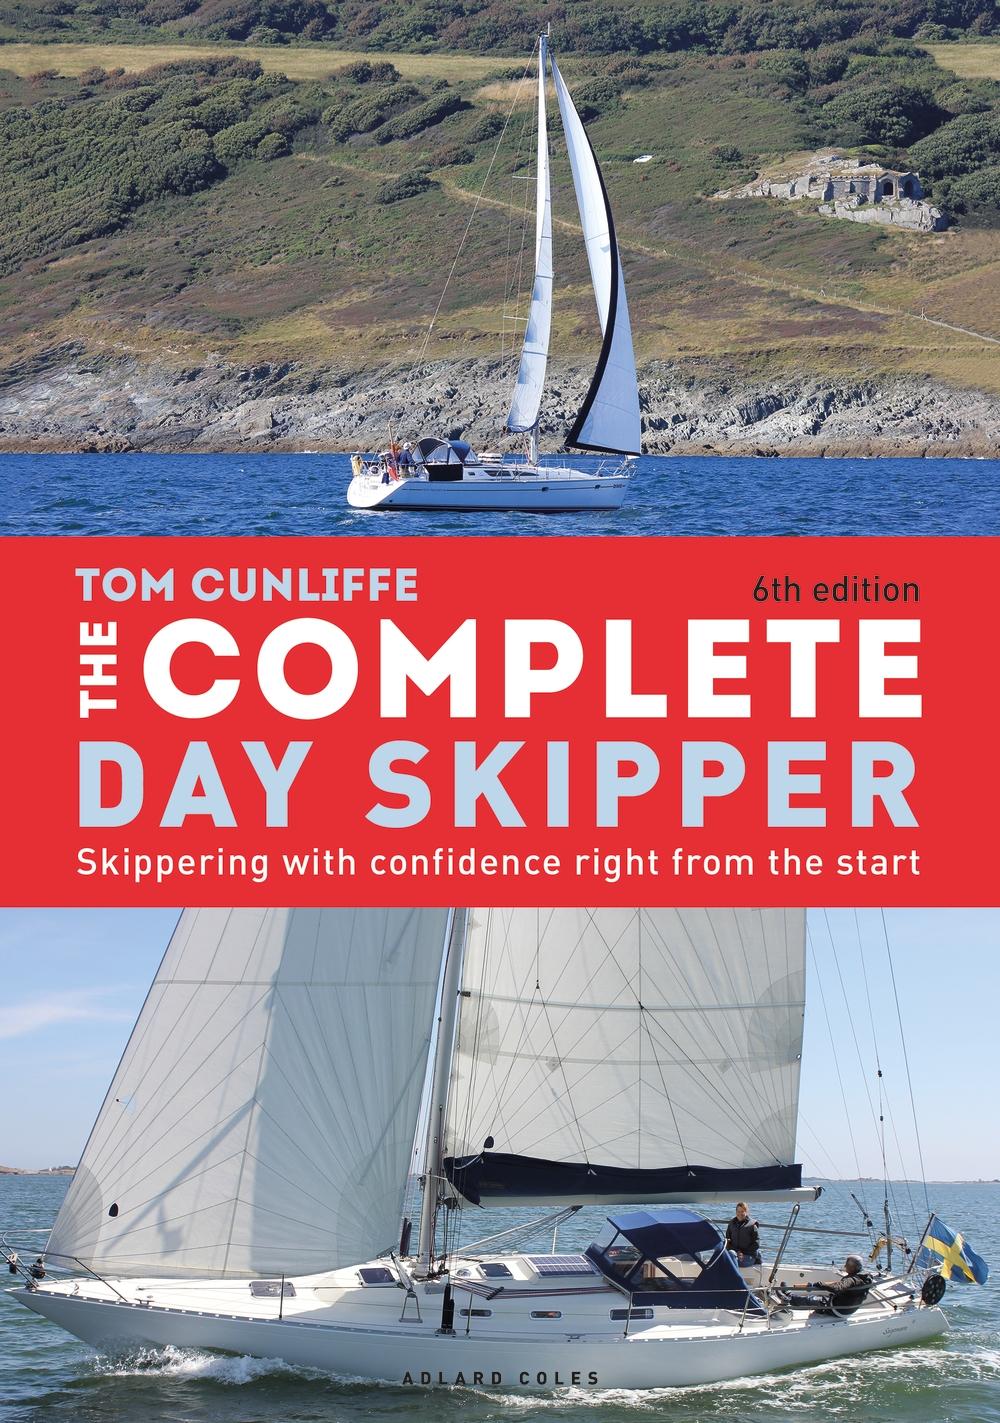 Complete Day Skipper - Tom Cunliffe